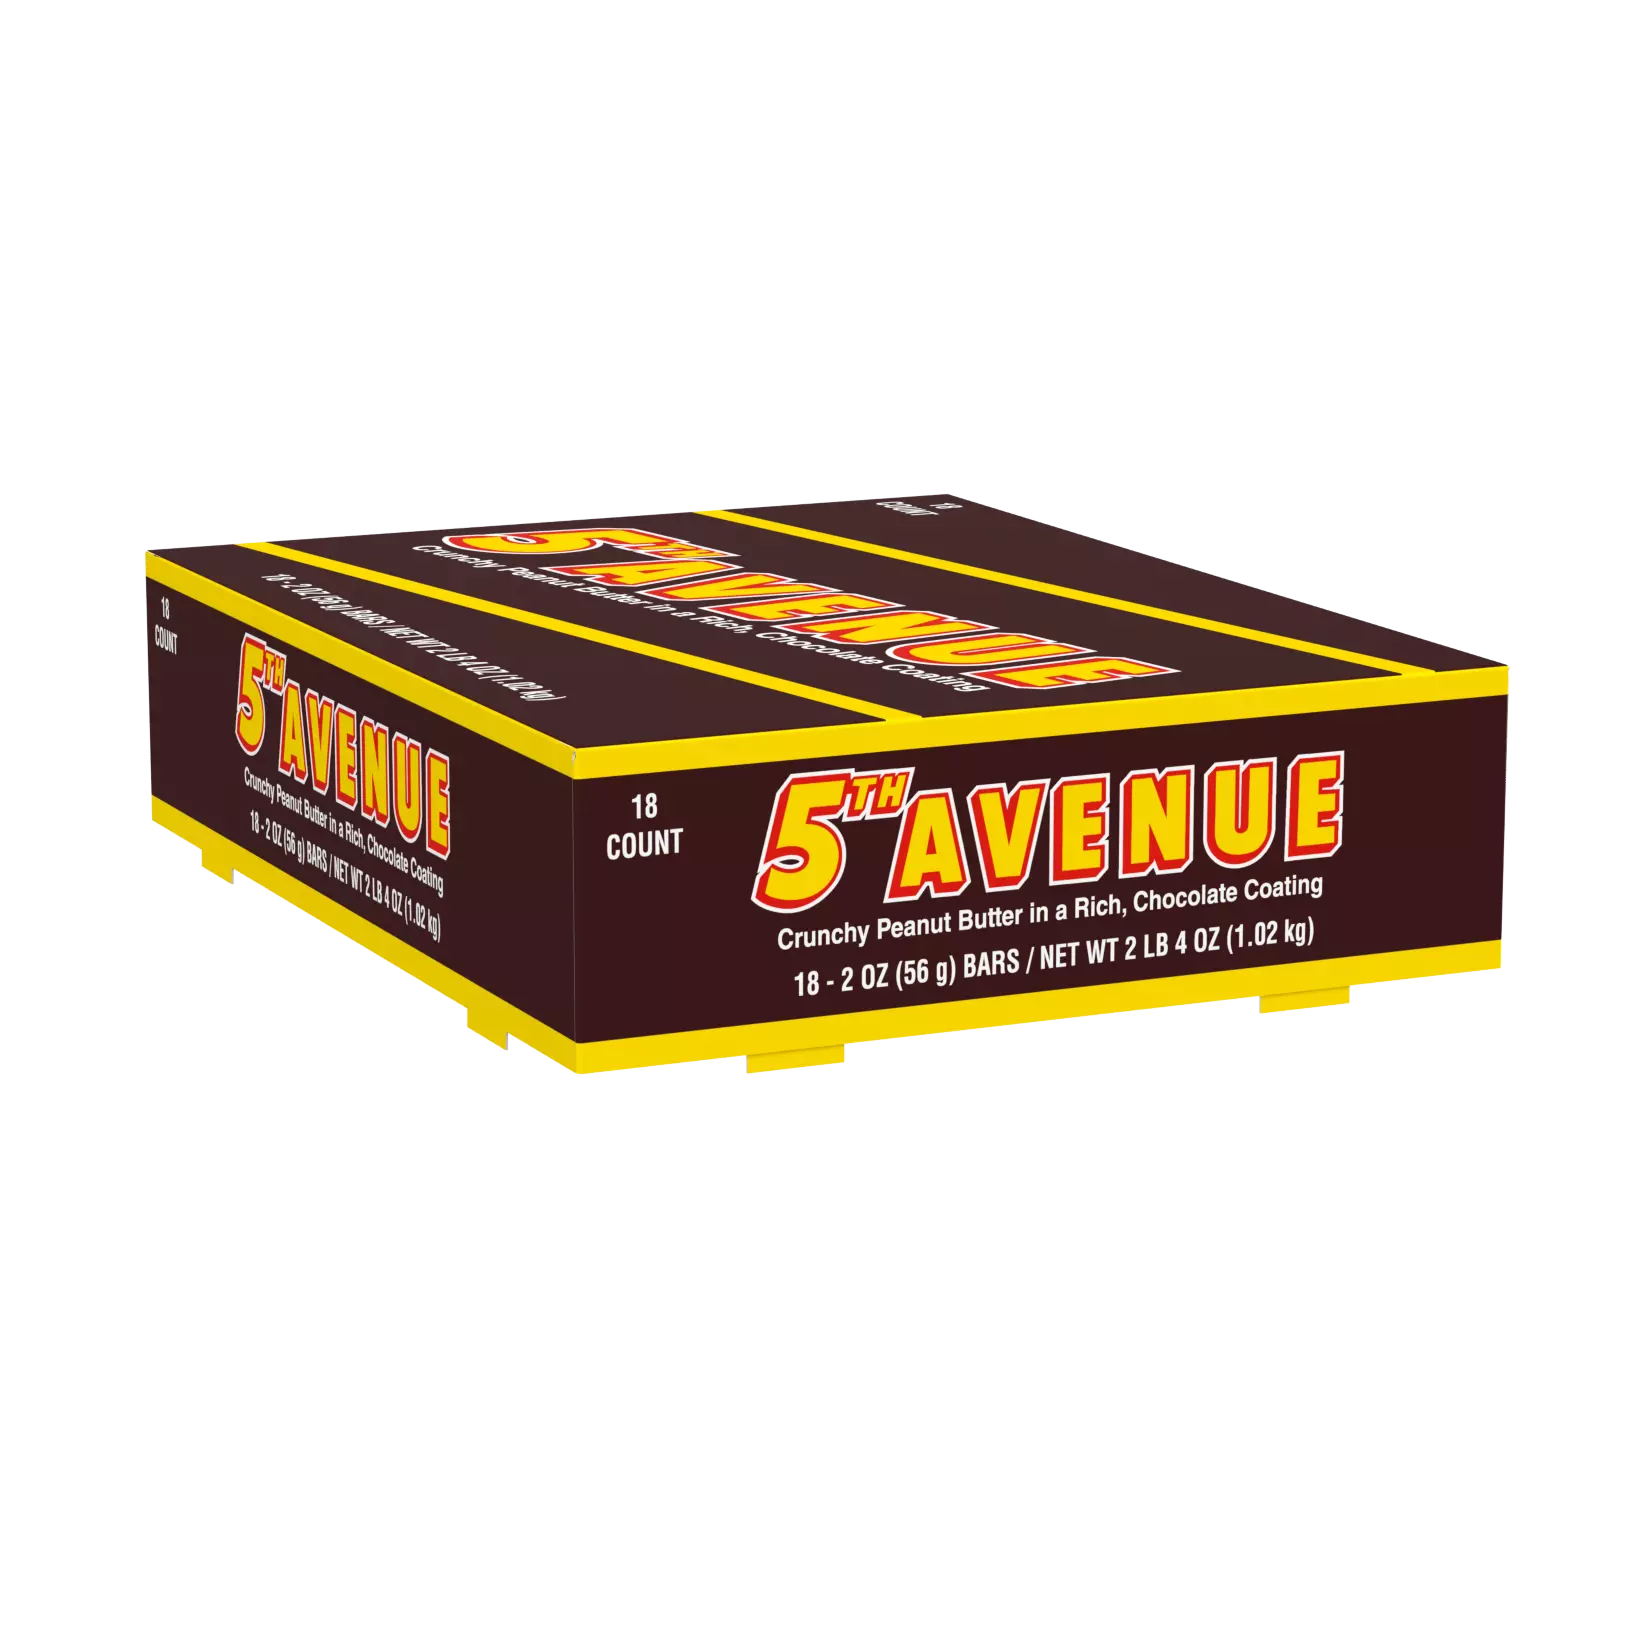 5TH AVENUE Candy Bar 56 g (18 Pack)